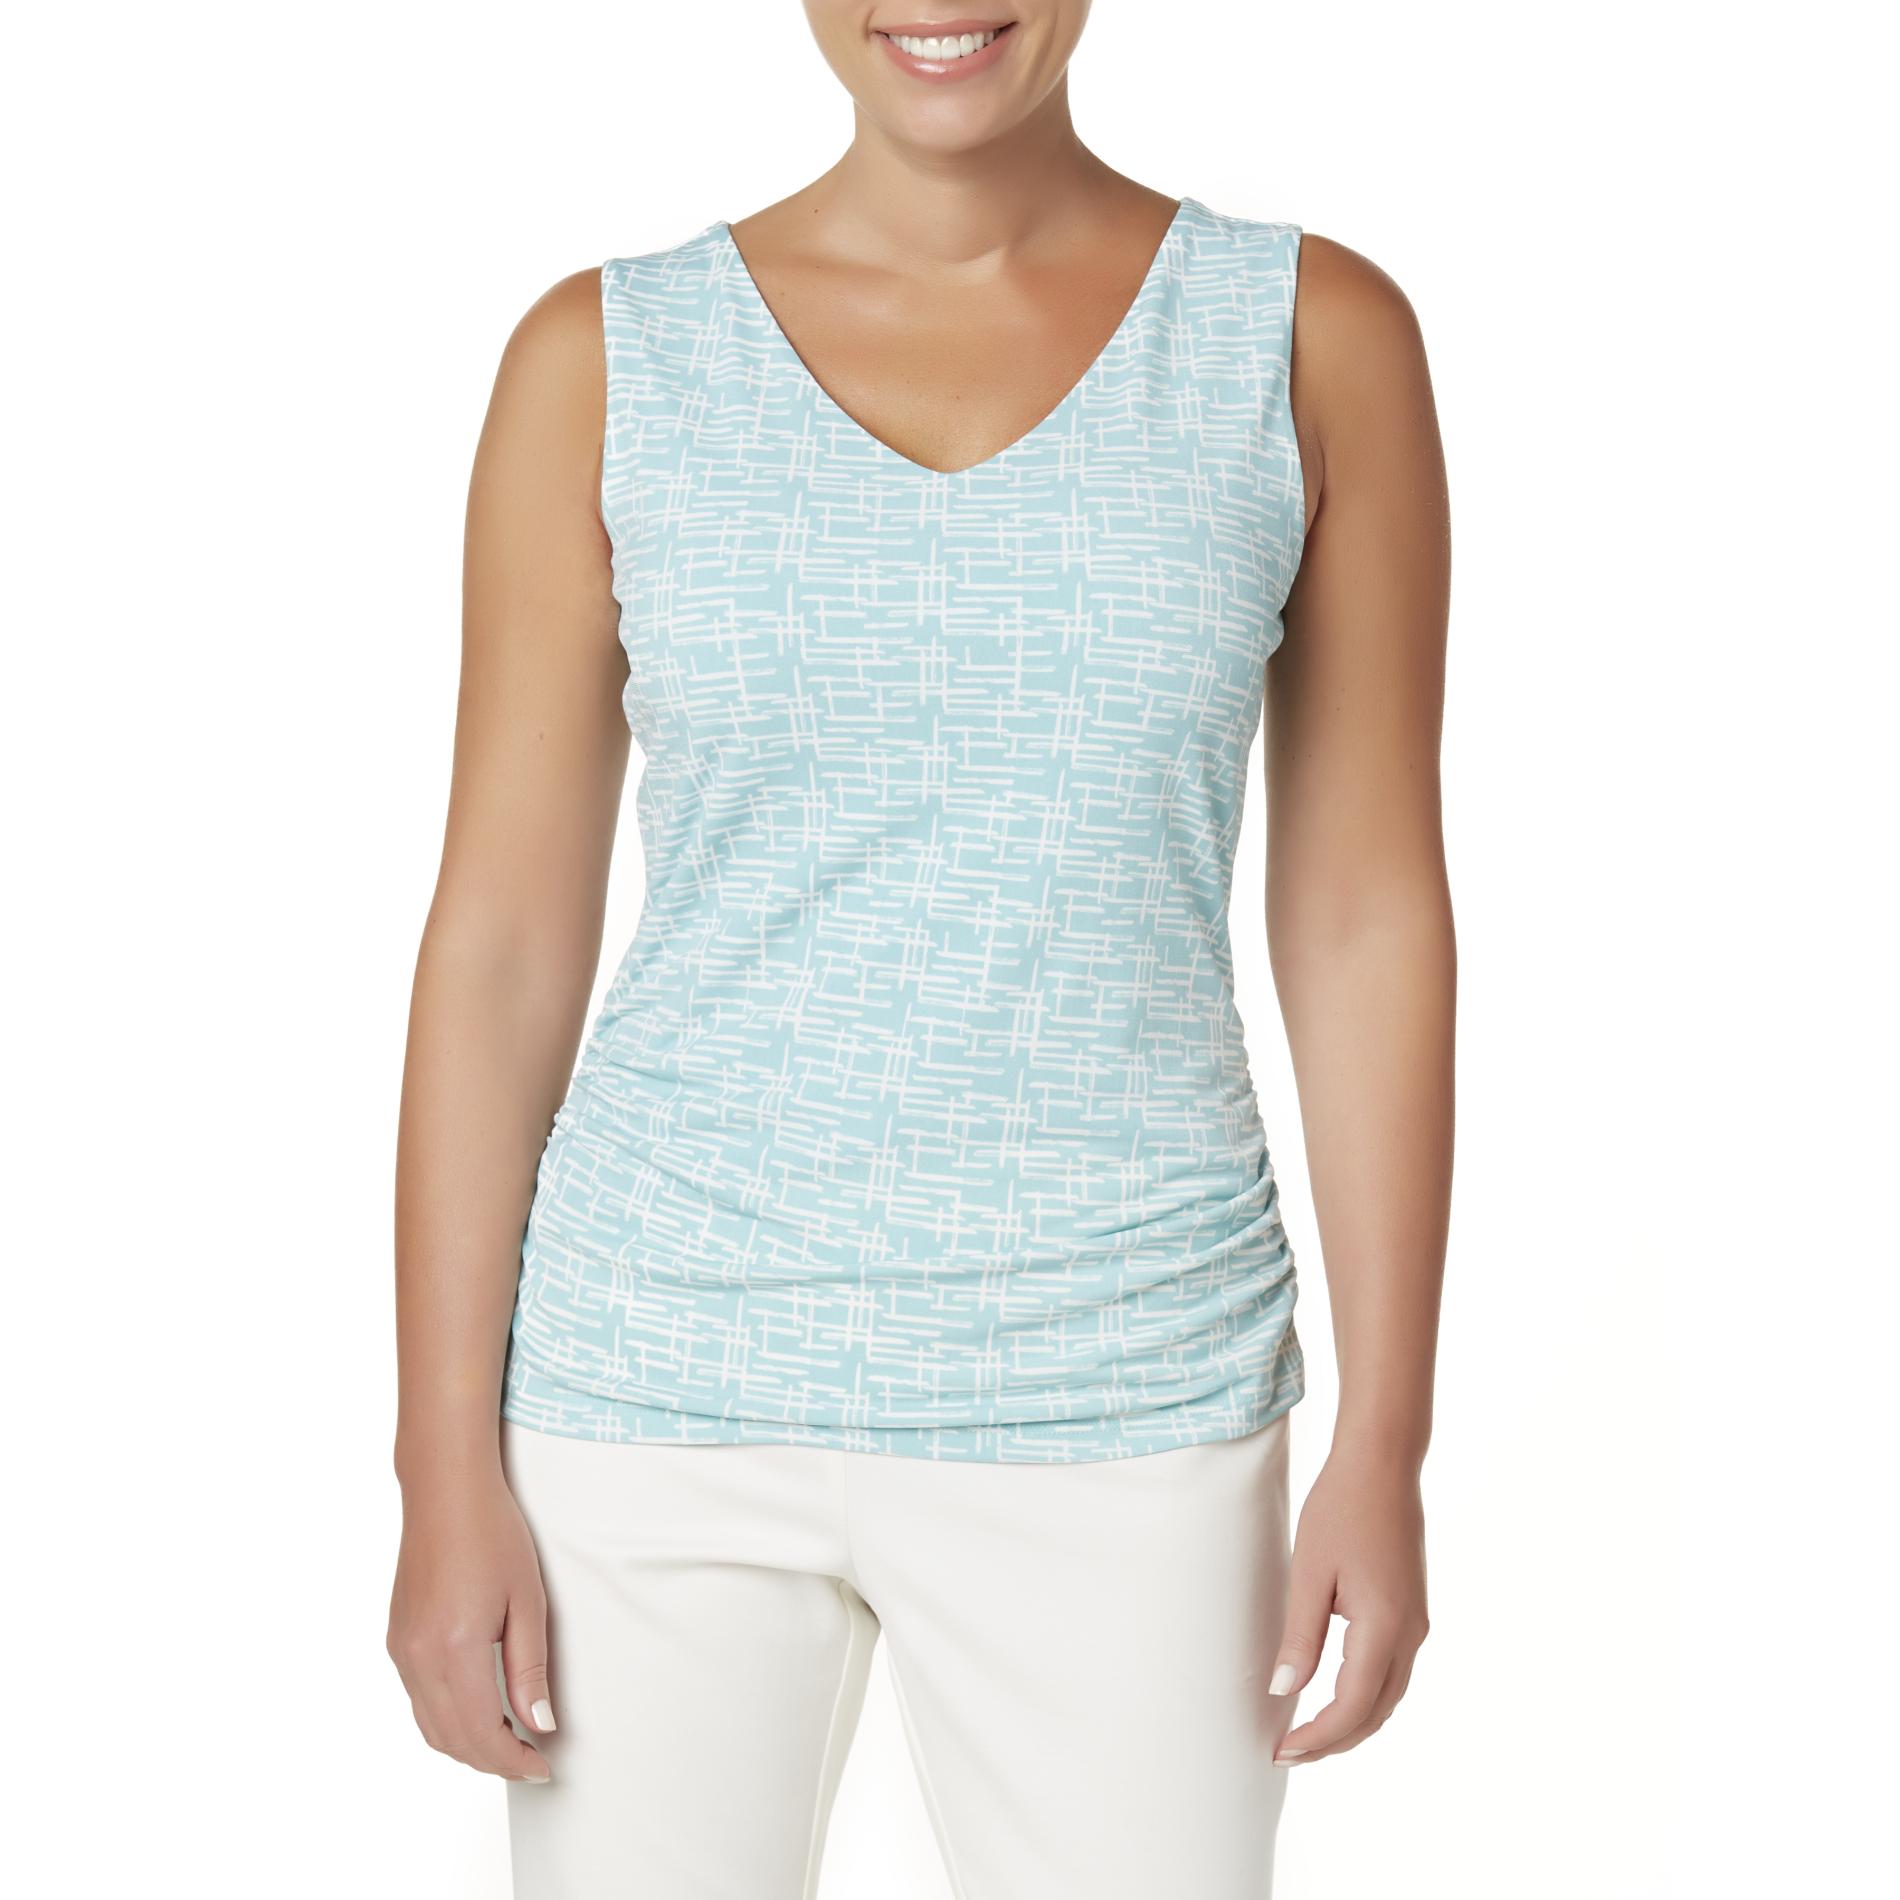 Simply Styled Women's Printed Tank Top - Crosshatch